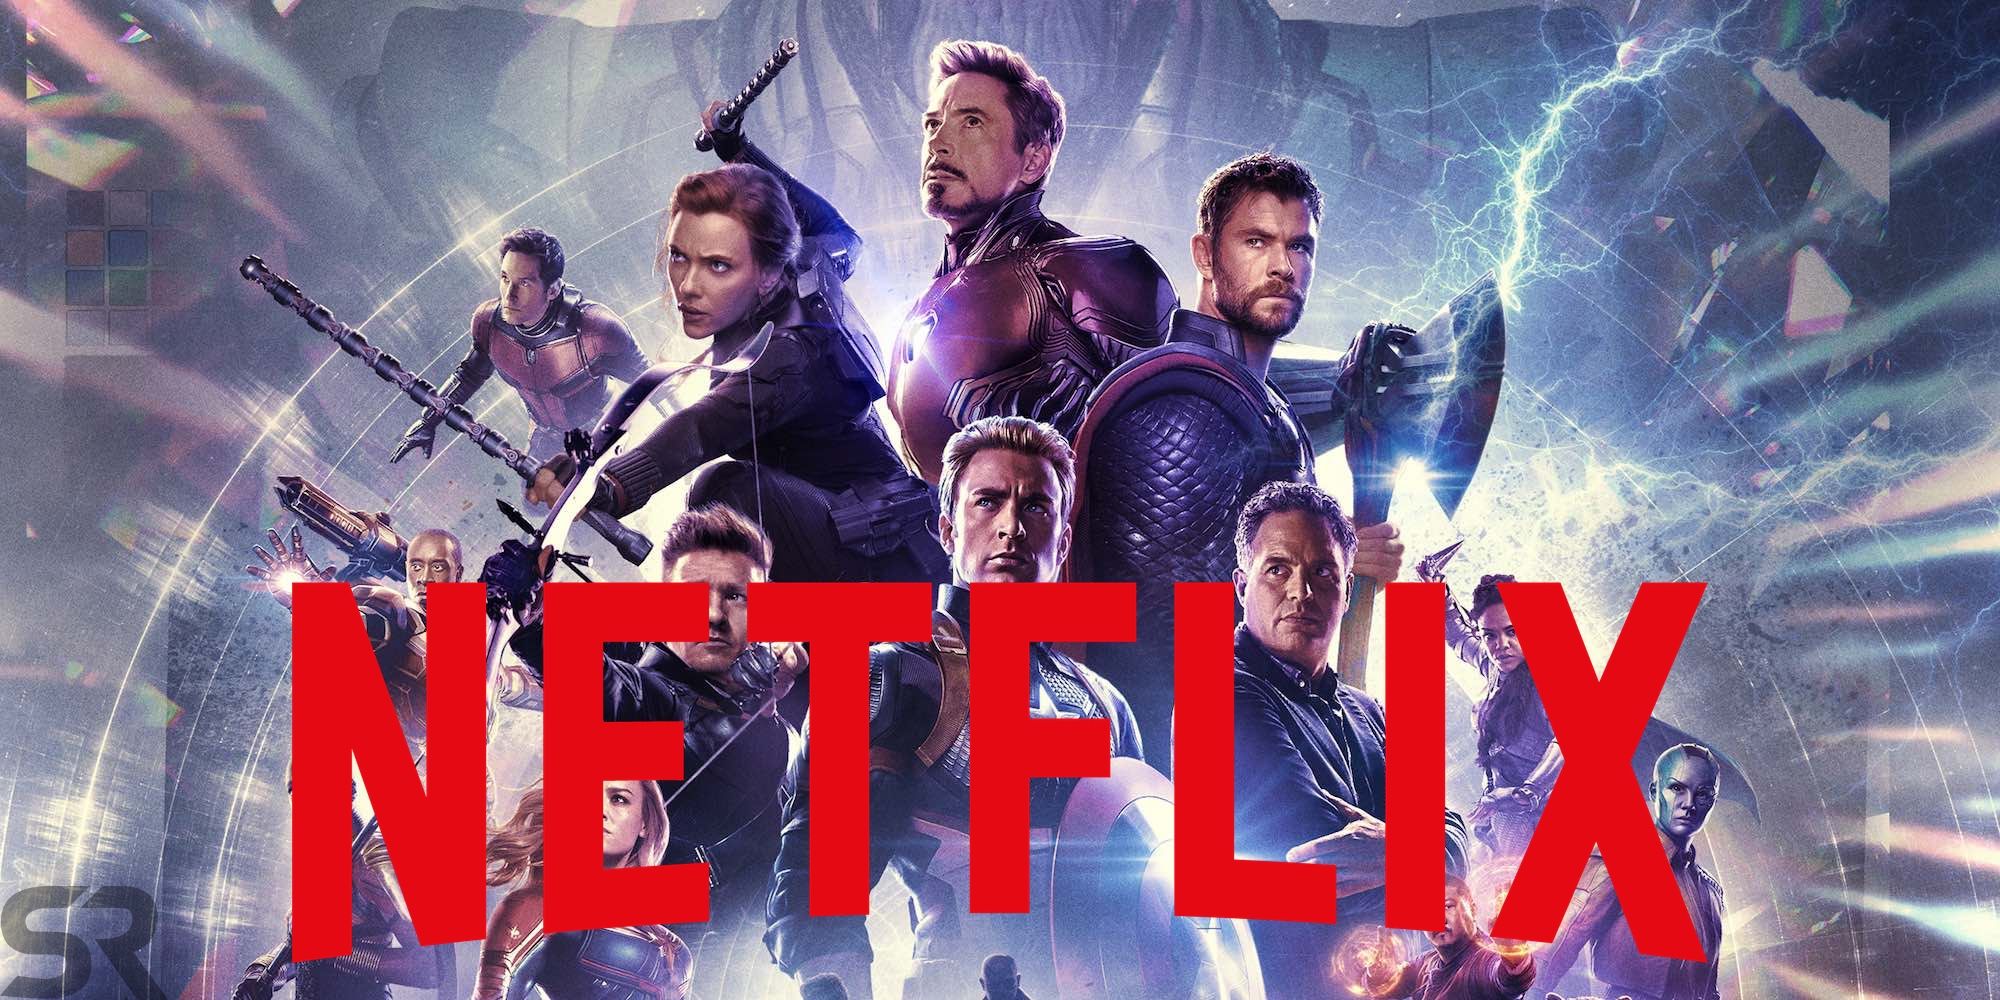 Is Avengers: Endgame Going to Be on Netflix?